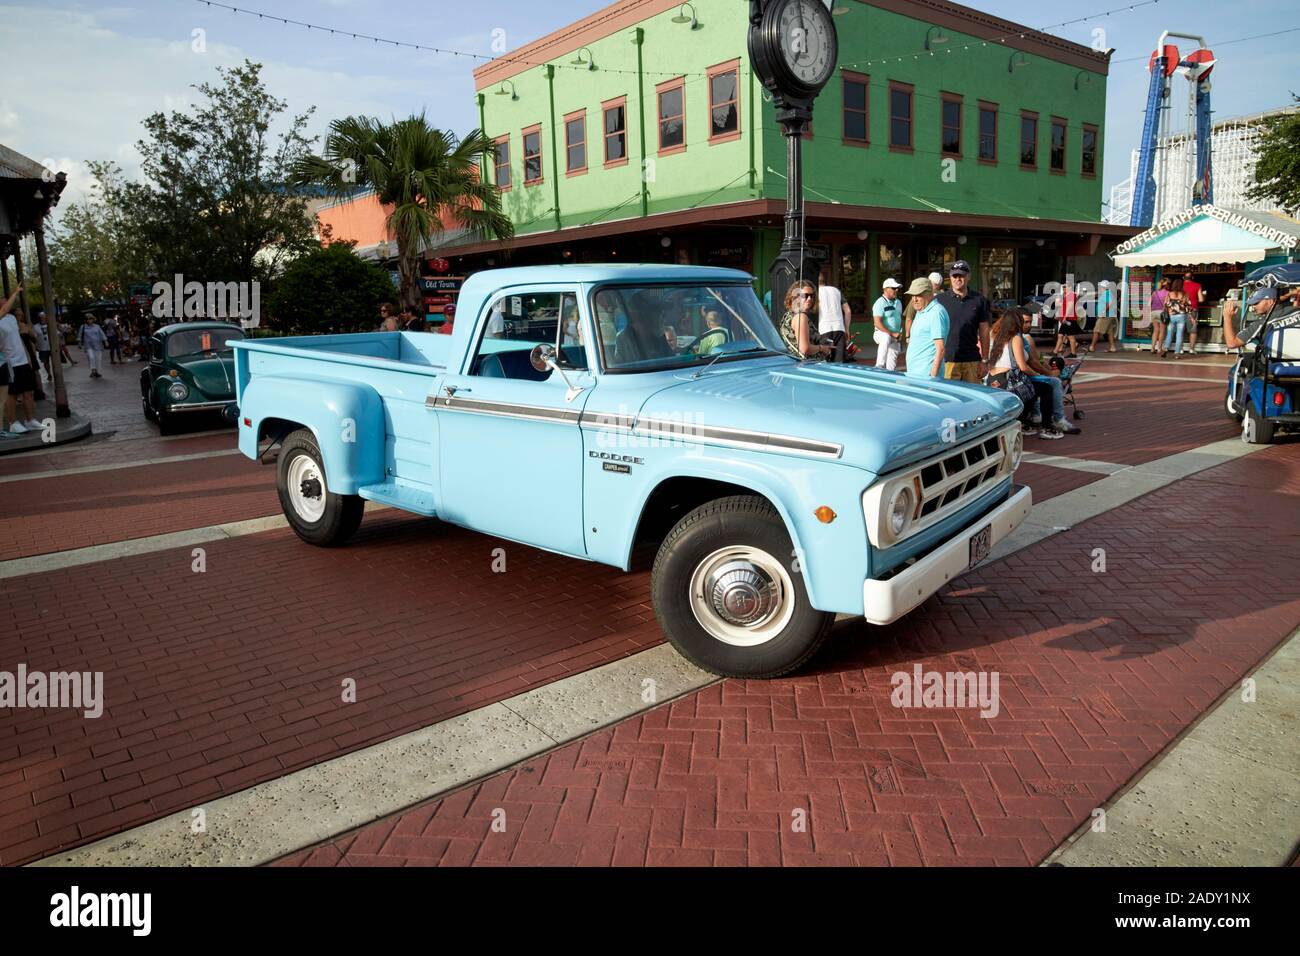 dodge camper pickup truck with classic car cruise through old town kissimmee florida usa Stock Photo